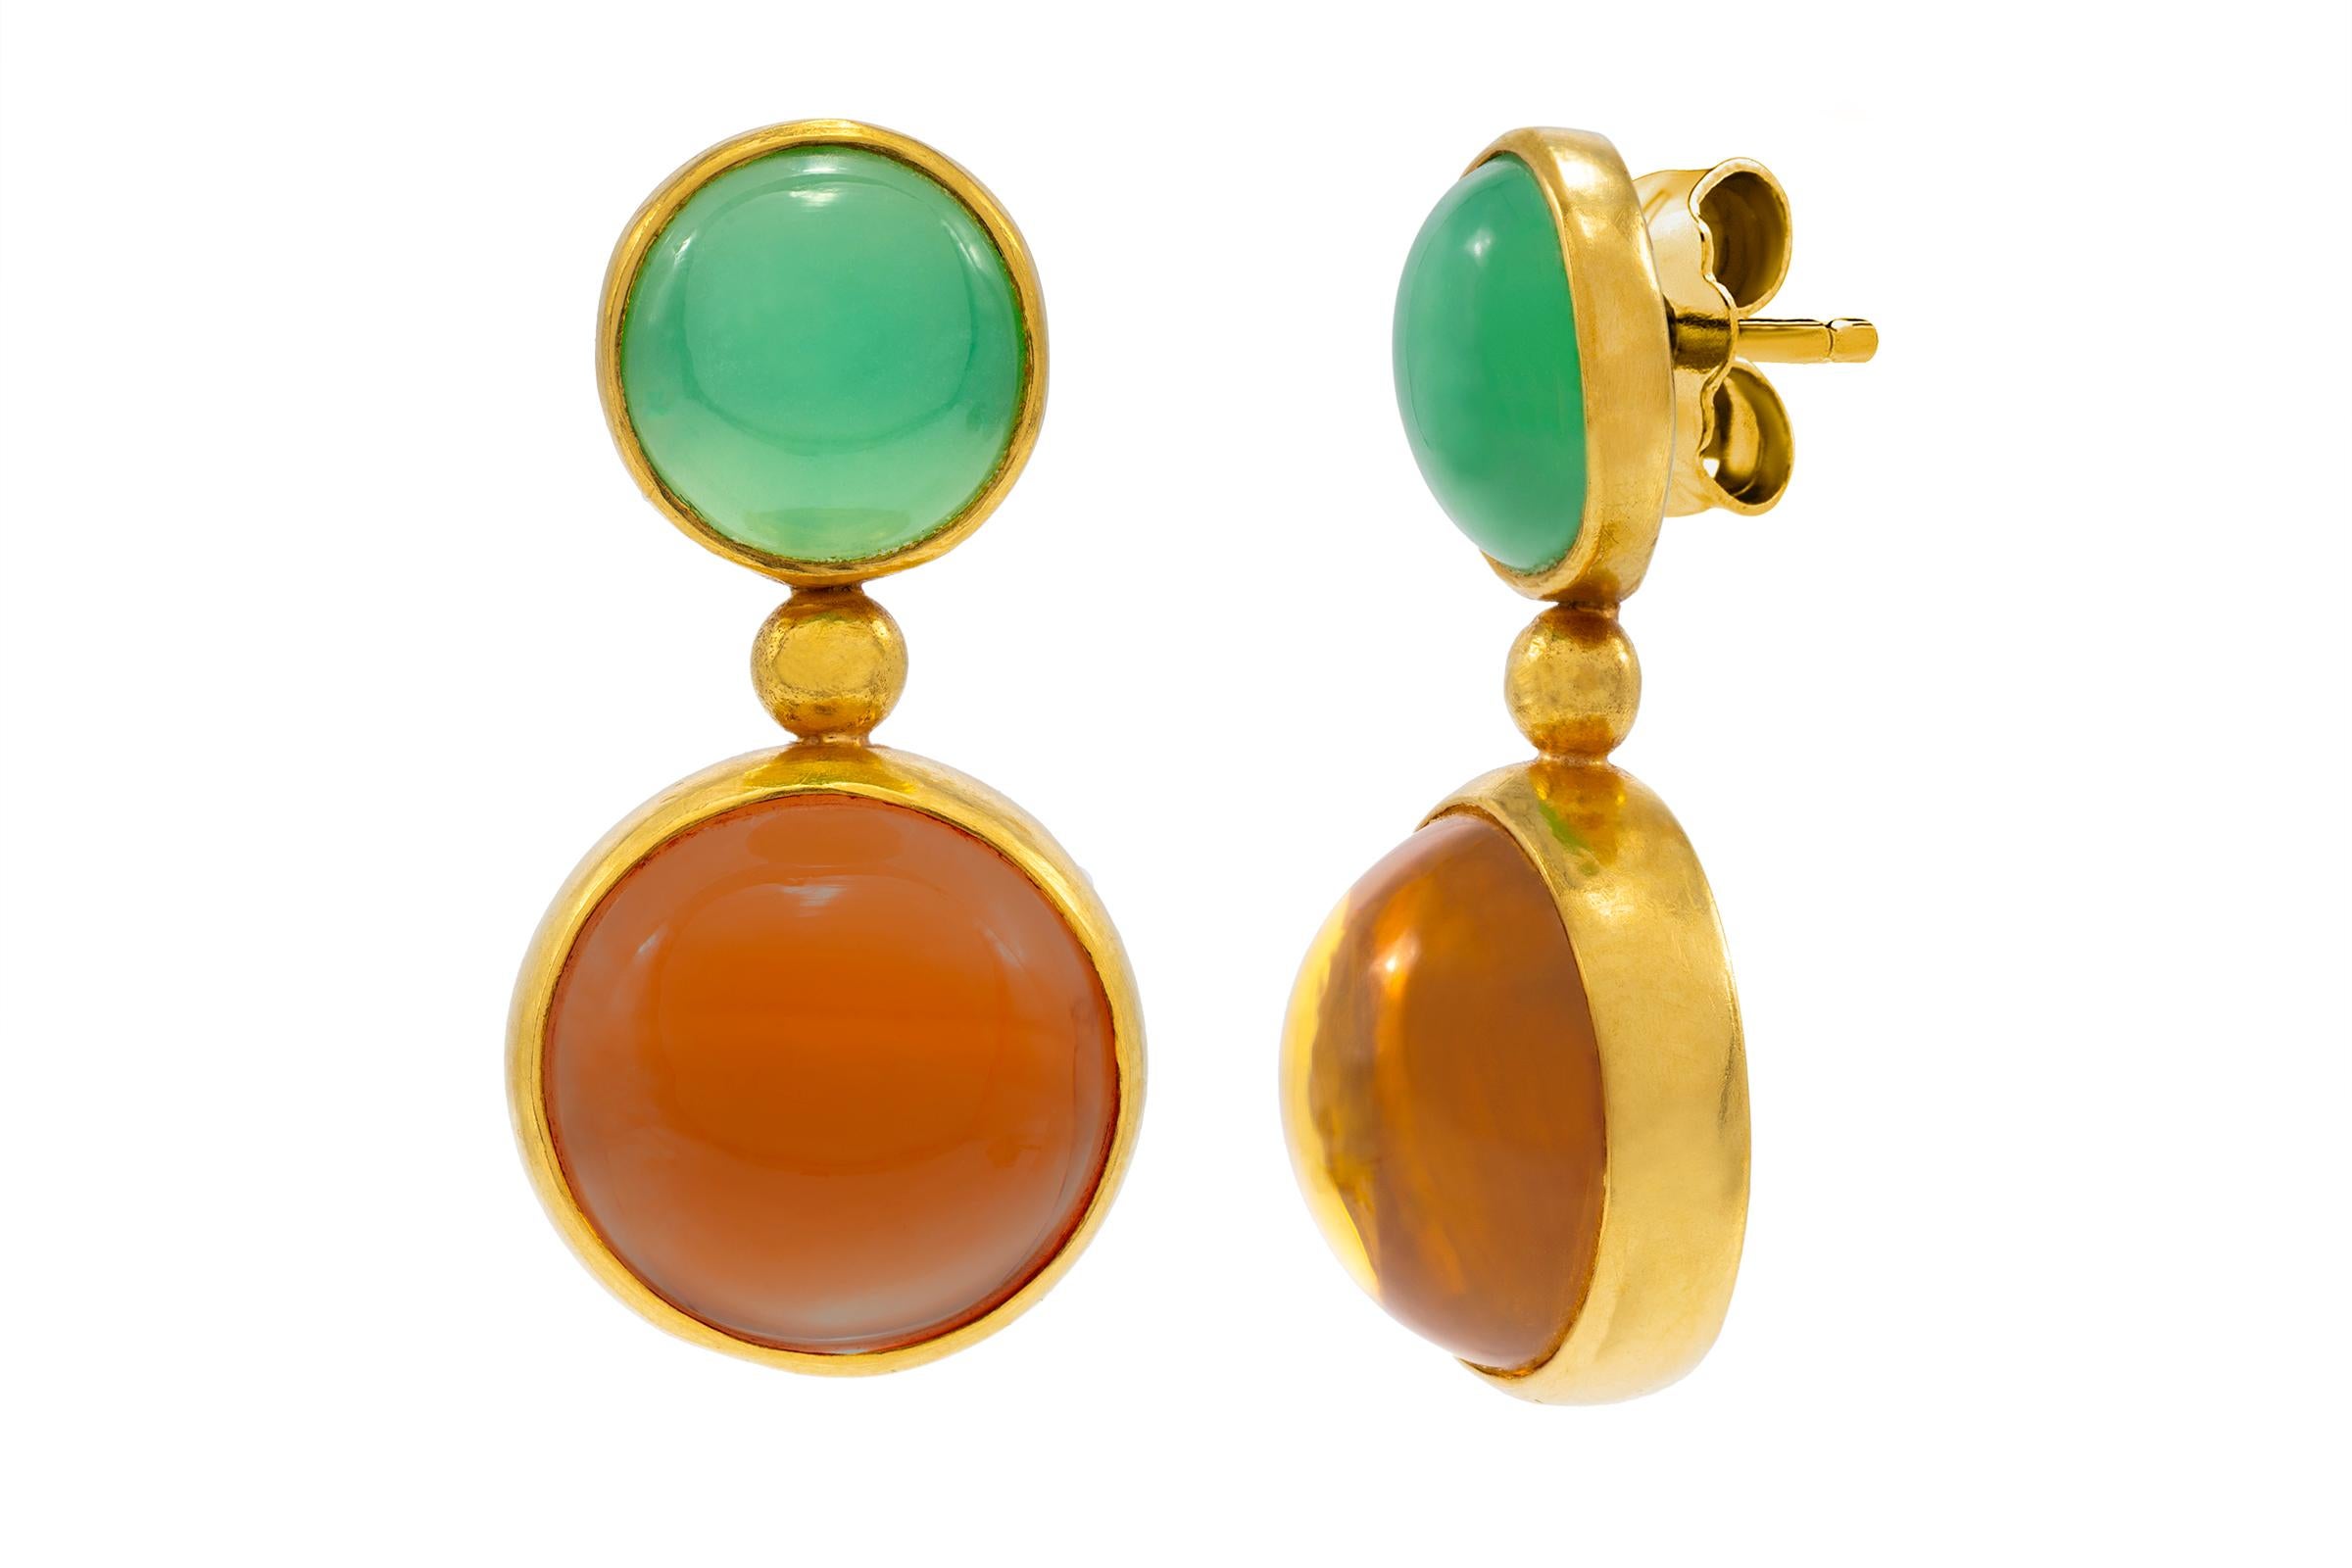 Round Cut Gold Drop Earrings with Chrysoprase & Citrine Stones by Tagili